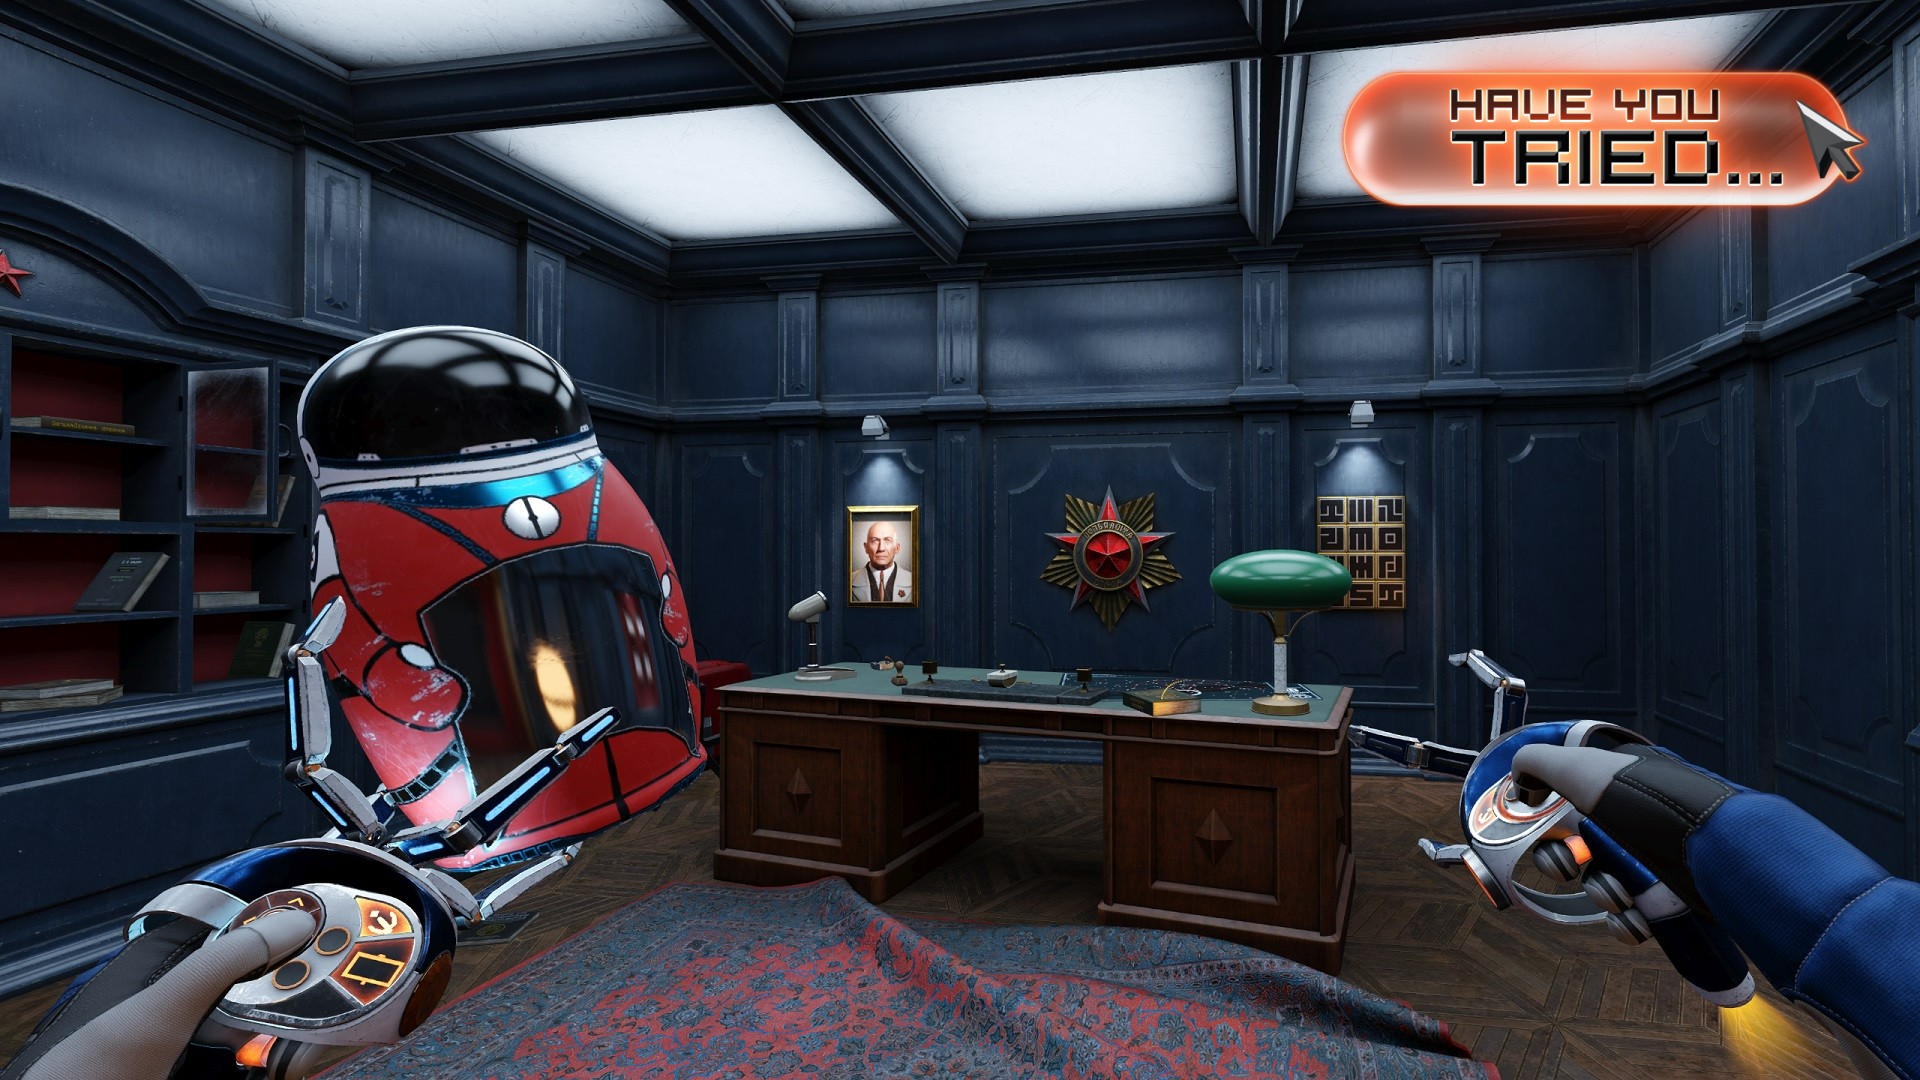 ophobe antyder pilot Have you tried… solving VR puzzles in space with Red Matter 2 | GamesRadar+